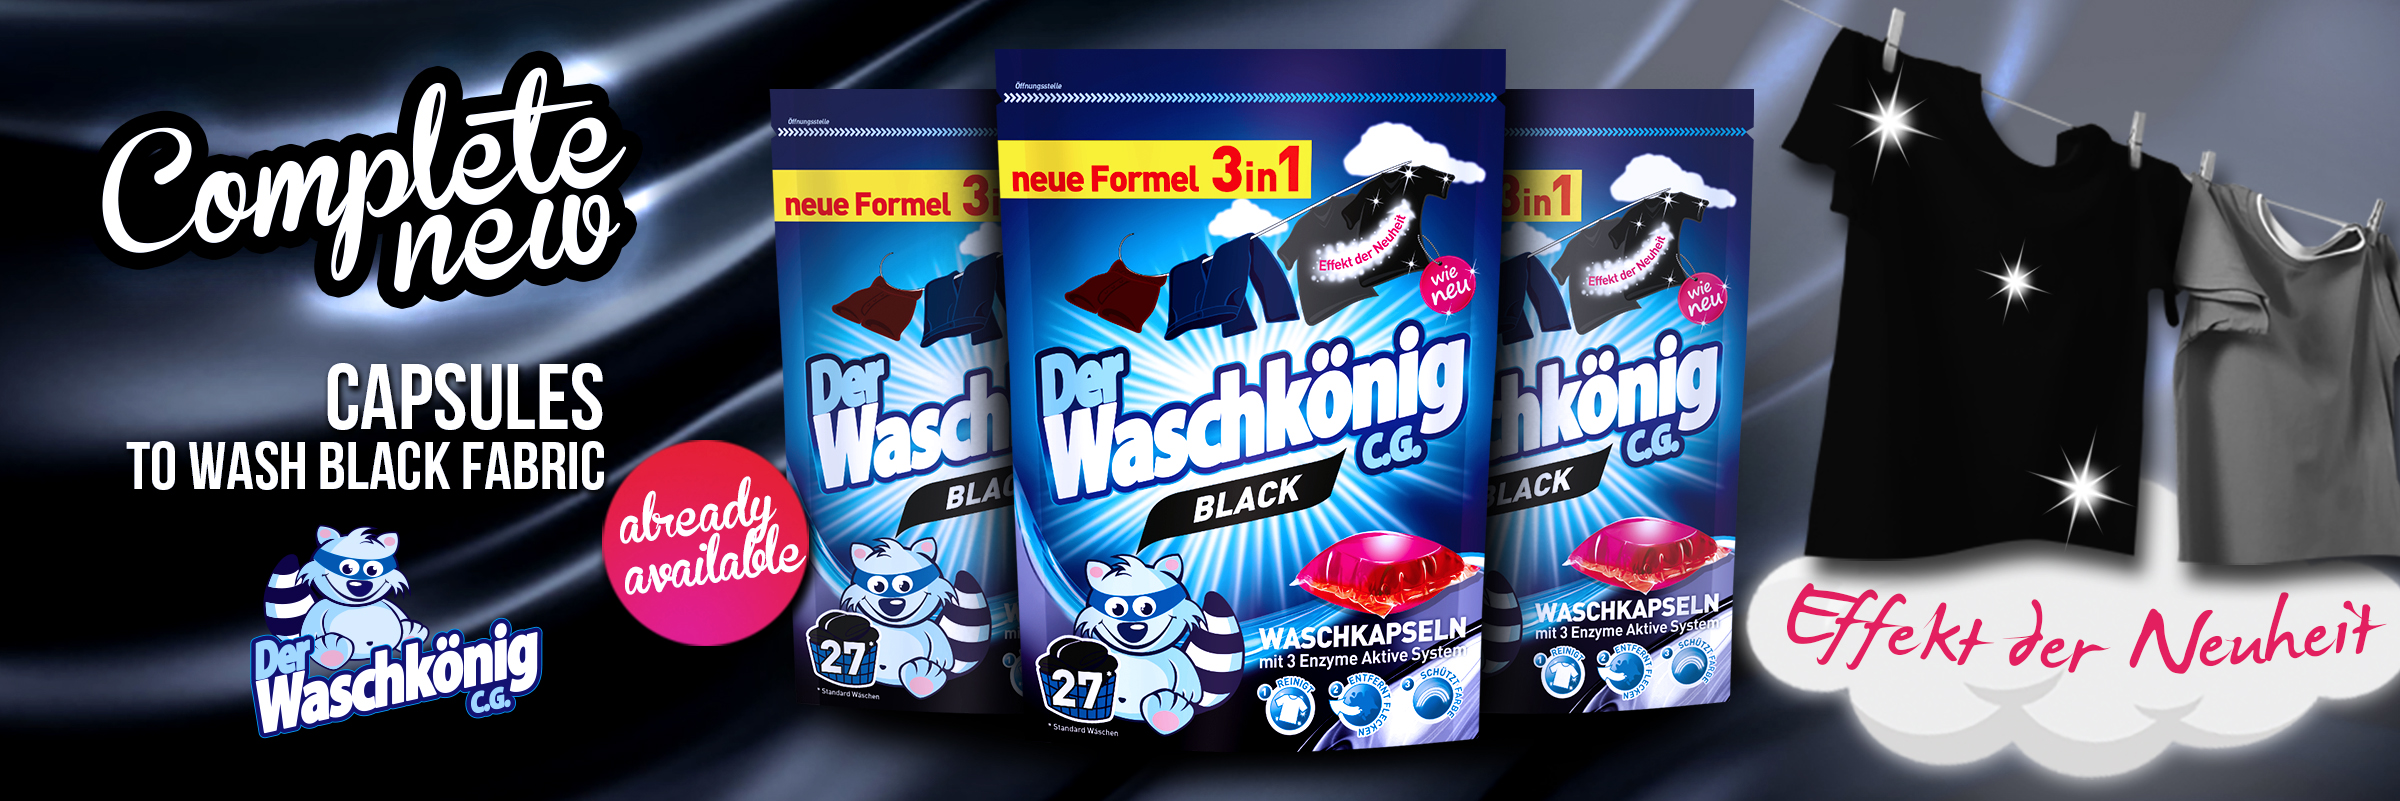 Latest product of Der Waschkönig now available for purchase!